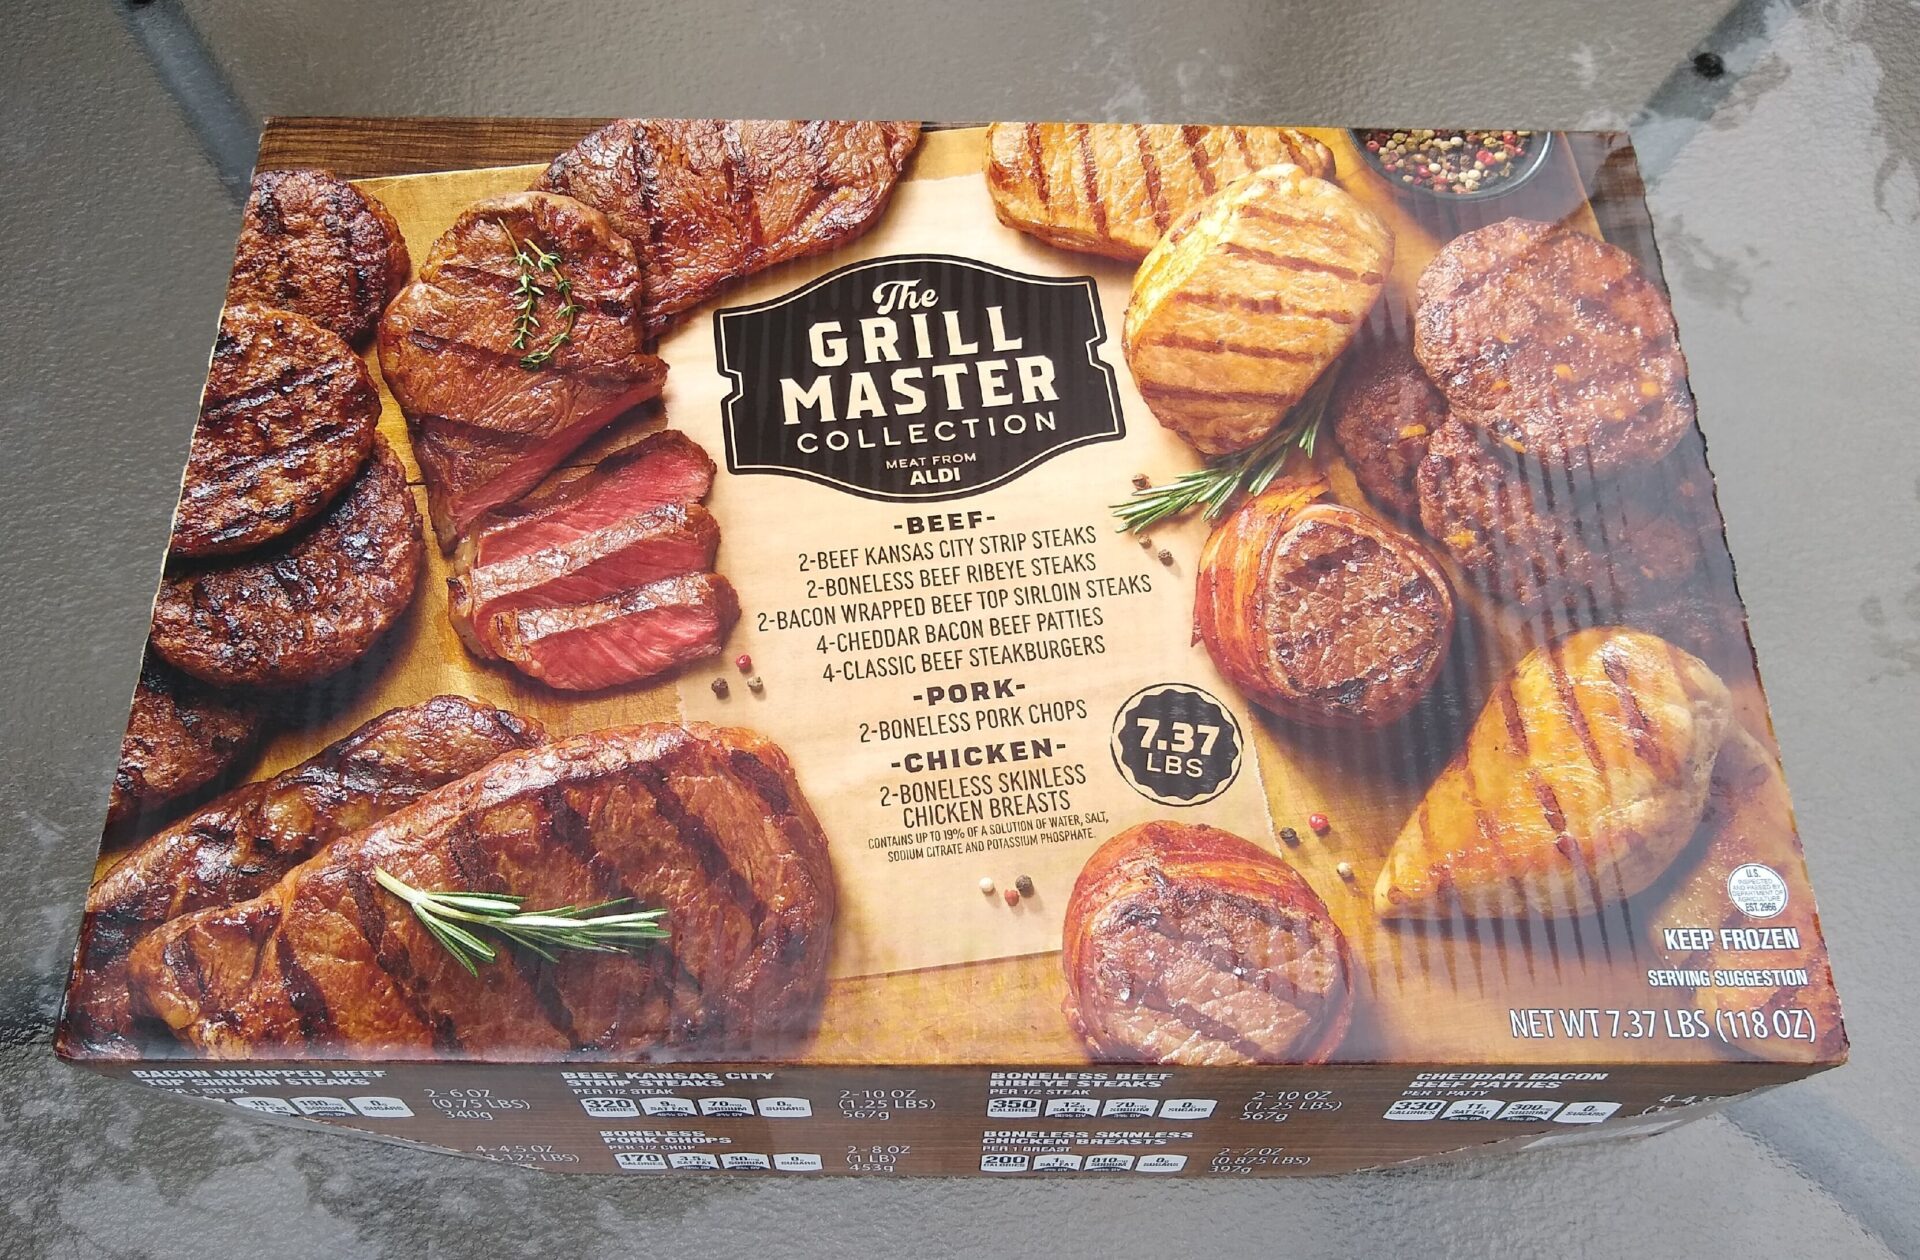 The Grill Master Collection